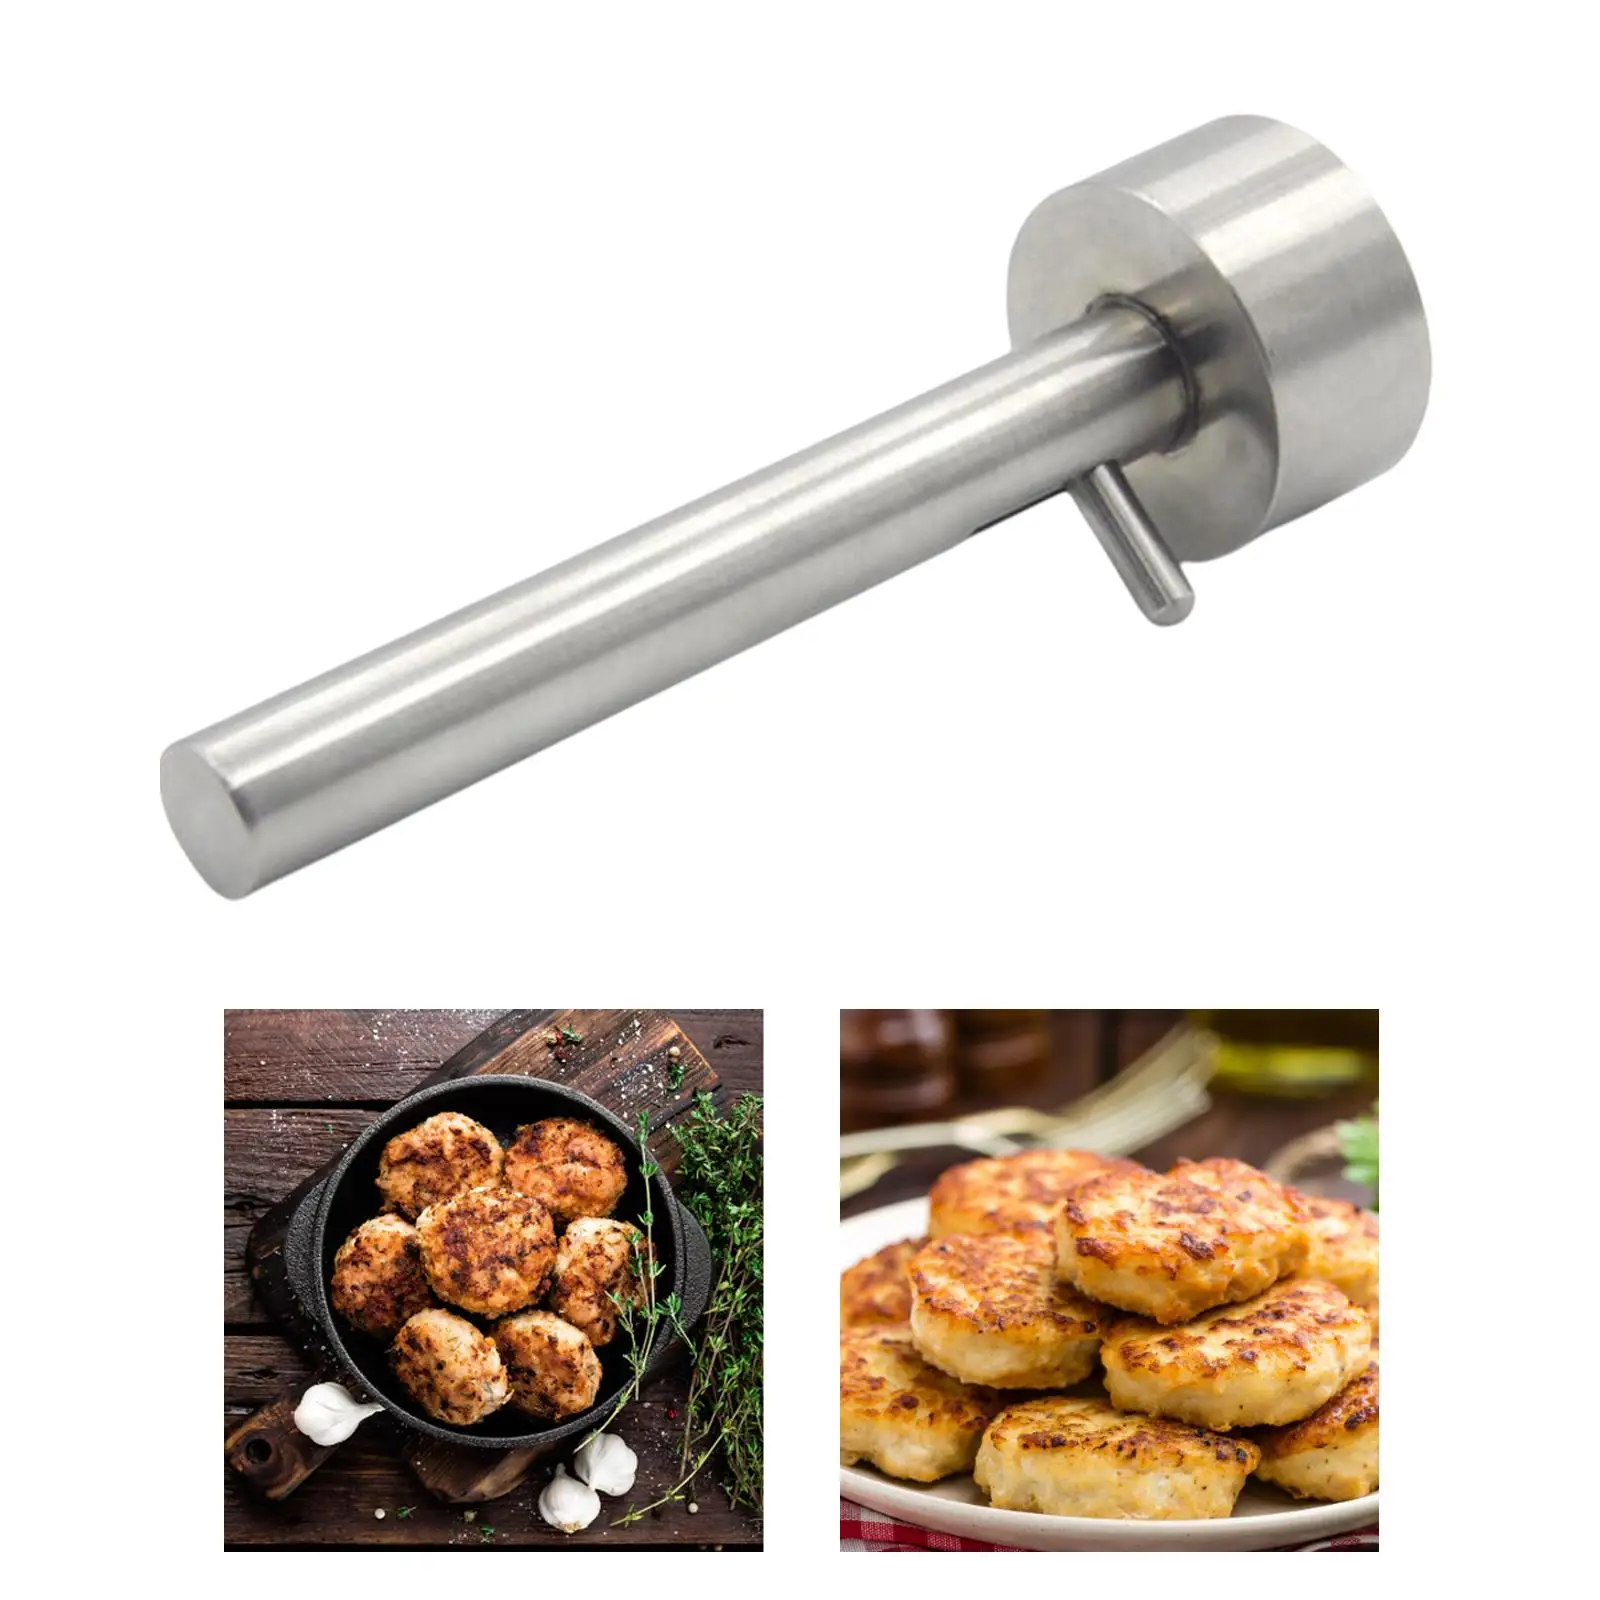 Handheld Meatball Making Tool Multifunctional Homemade Fast Filling Tool Detachable Manual for Household Restaurant Kitchen BBQ